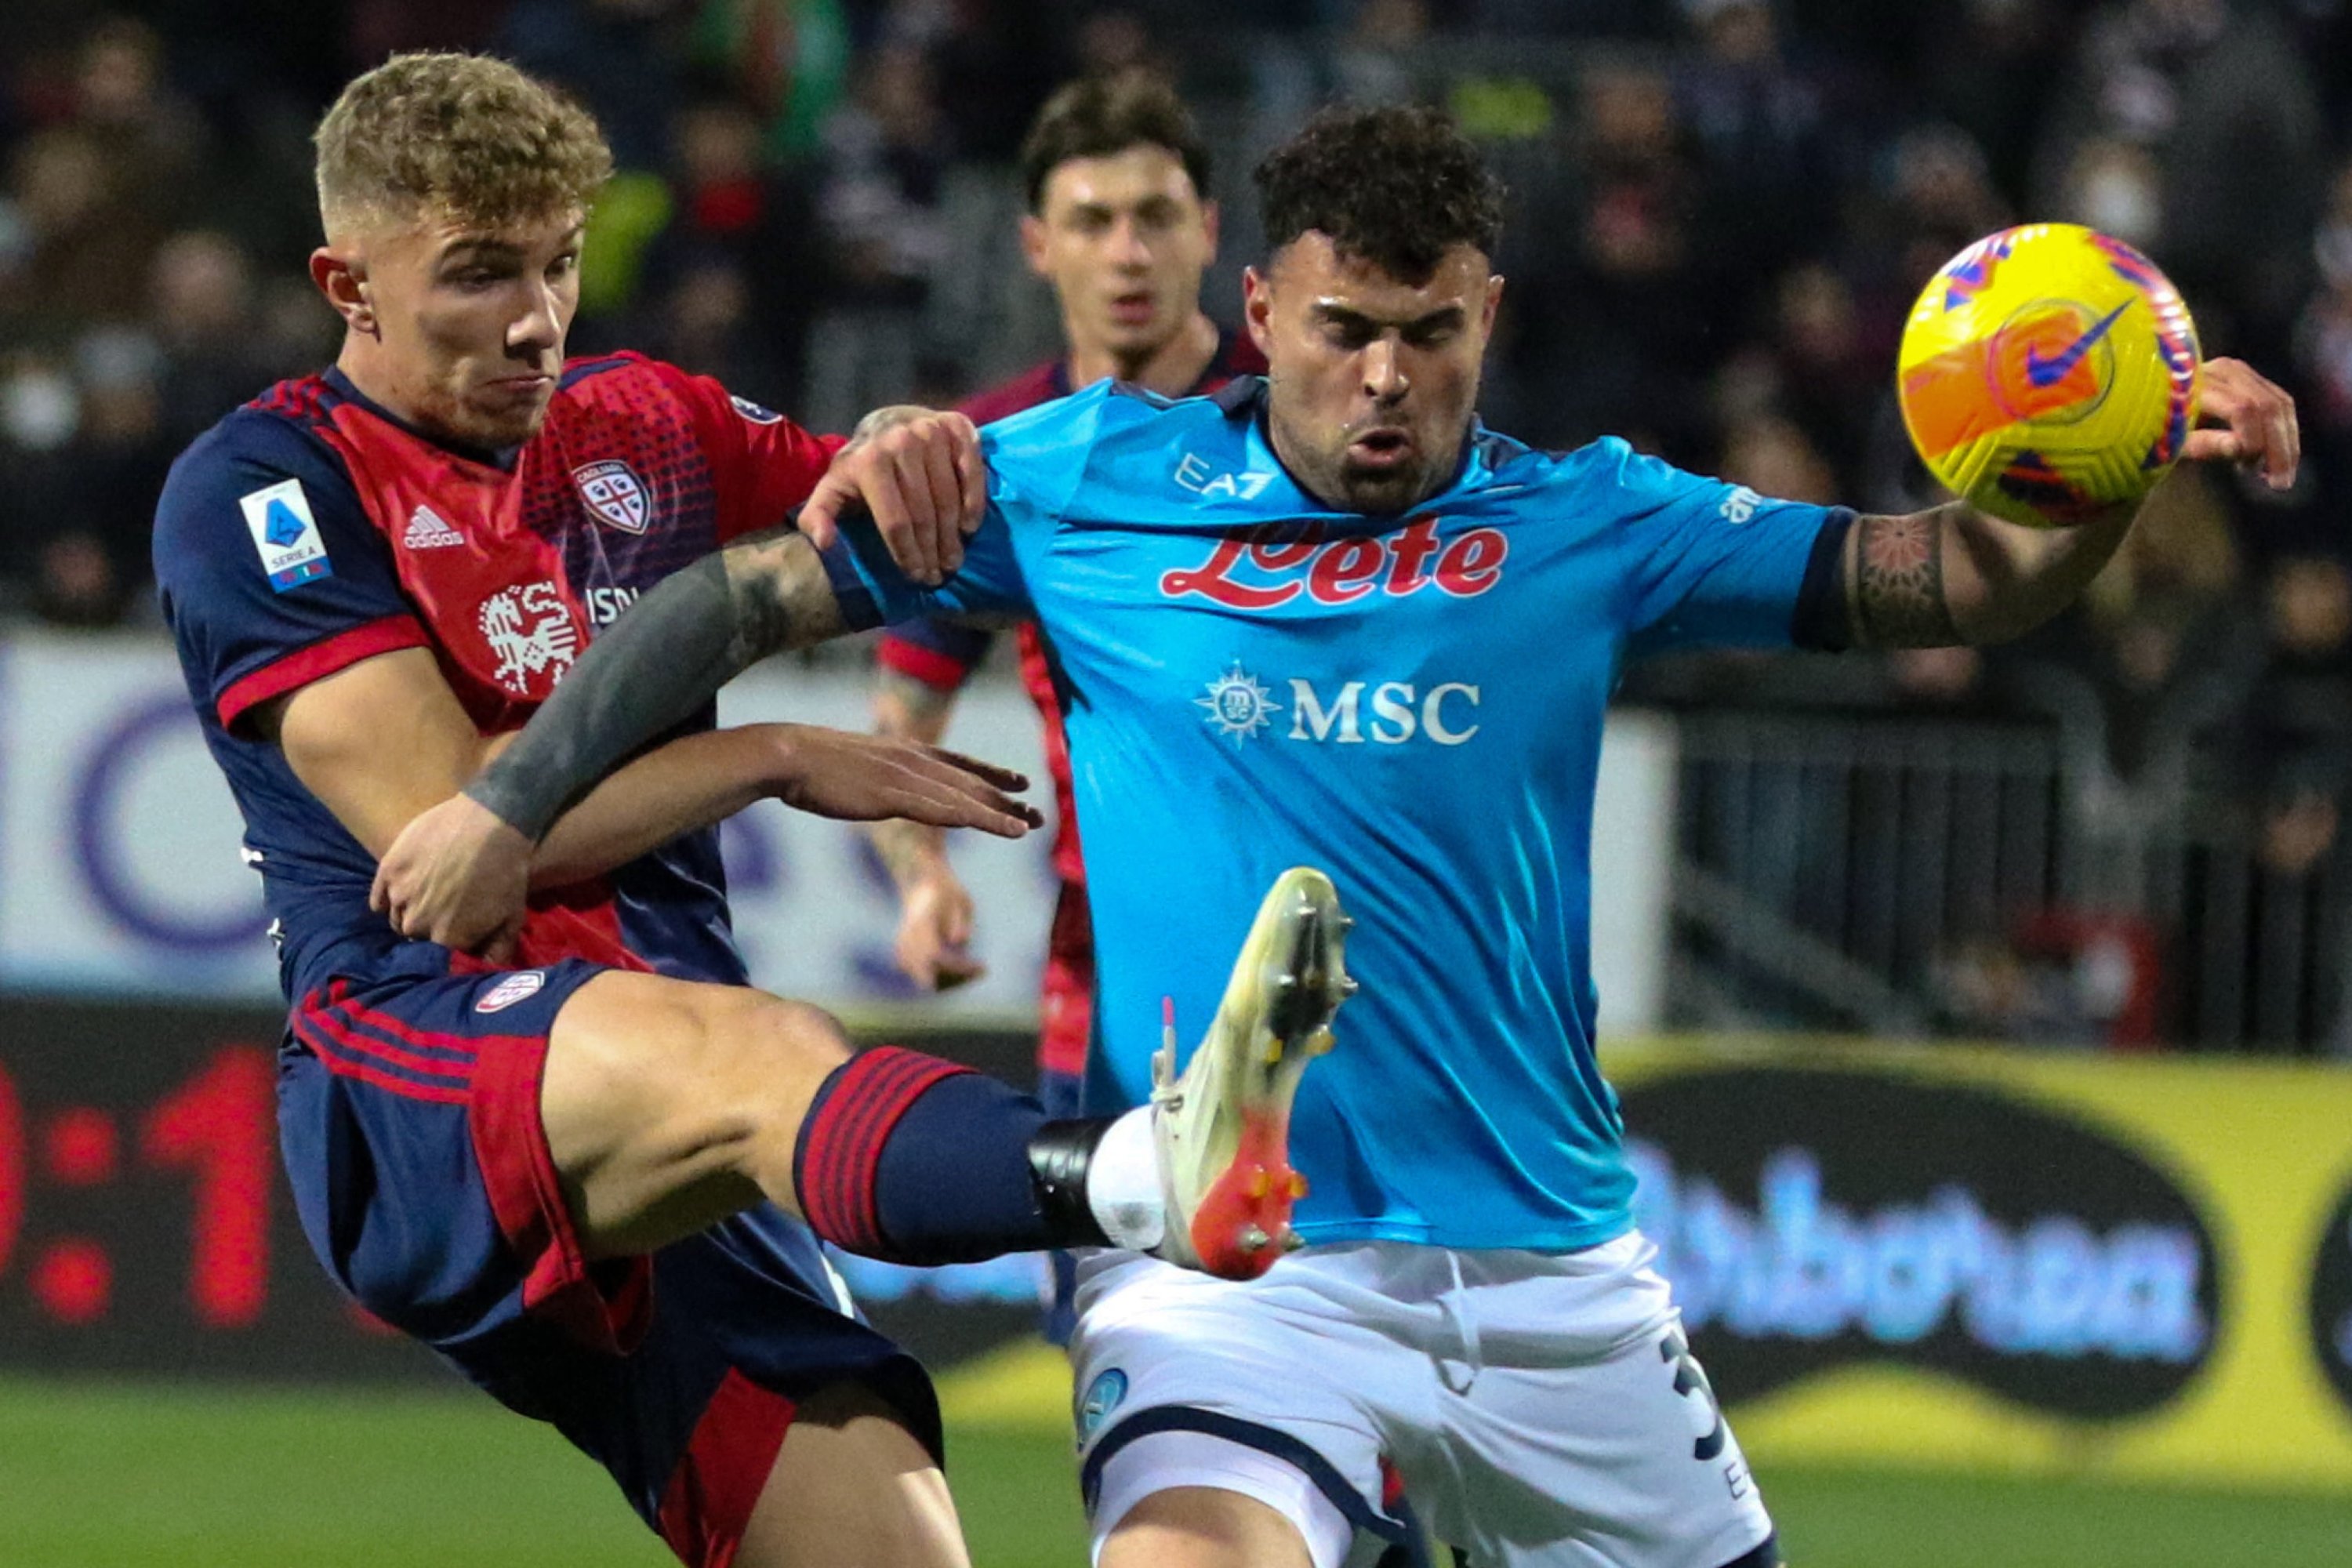 Relegation-threatened Cagliari draws to deny Napoli Serie A lead Daily Sabah